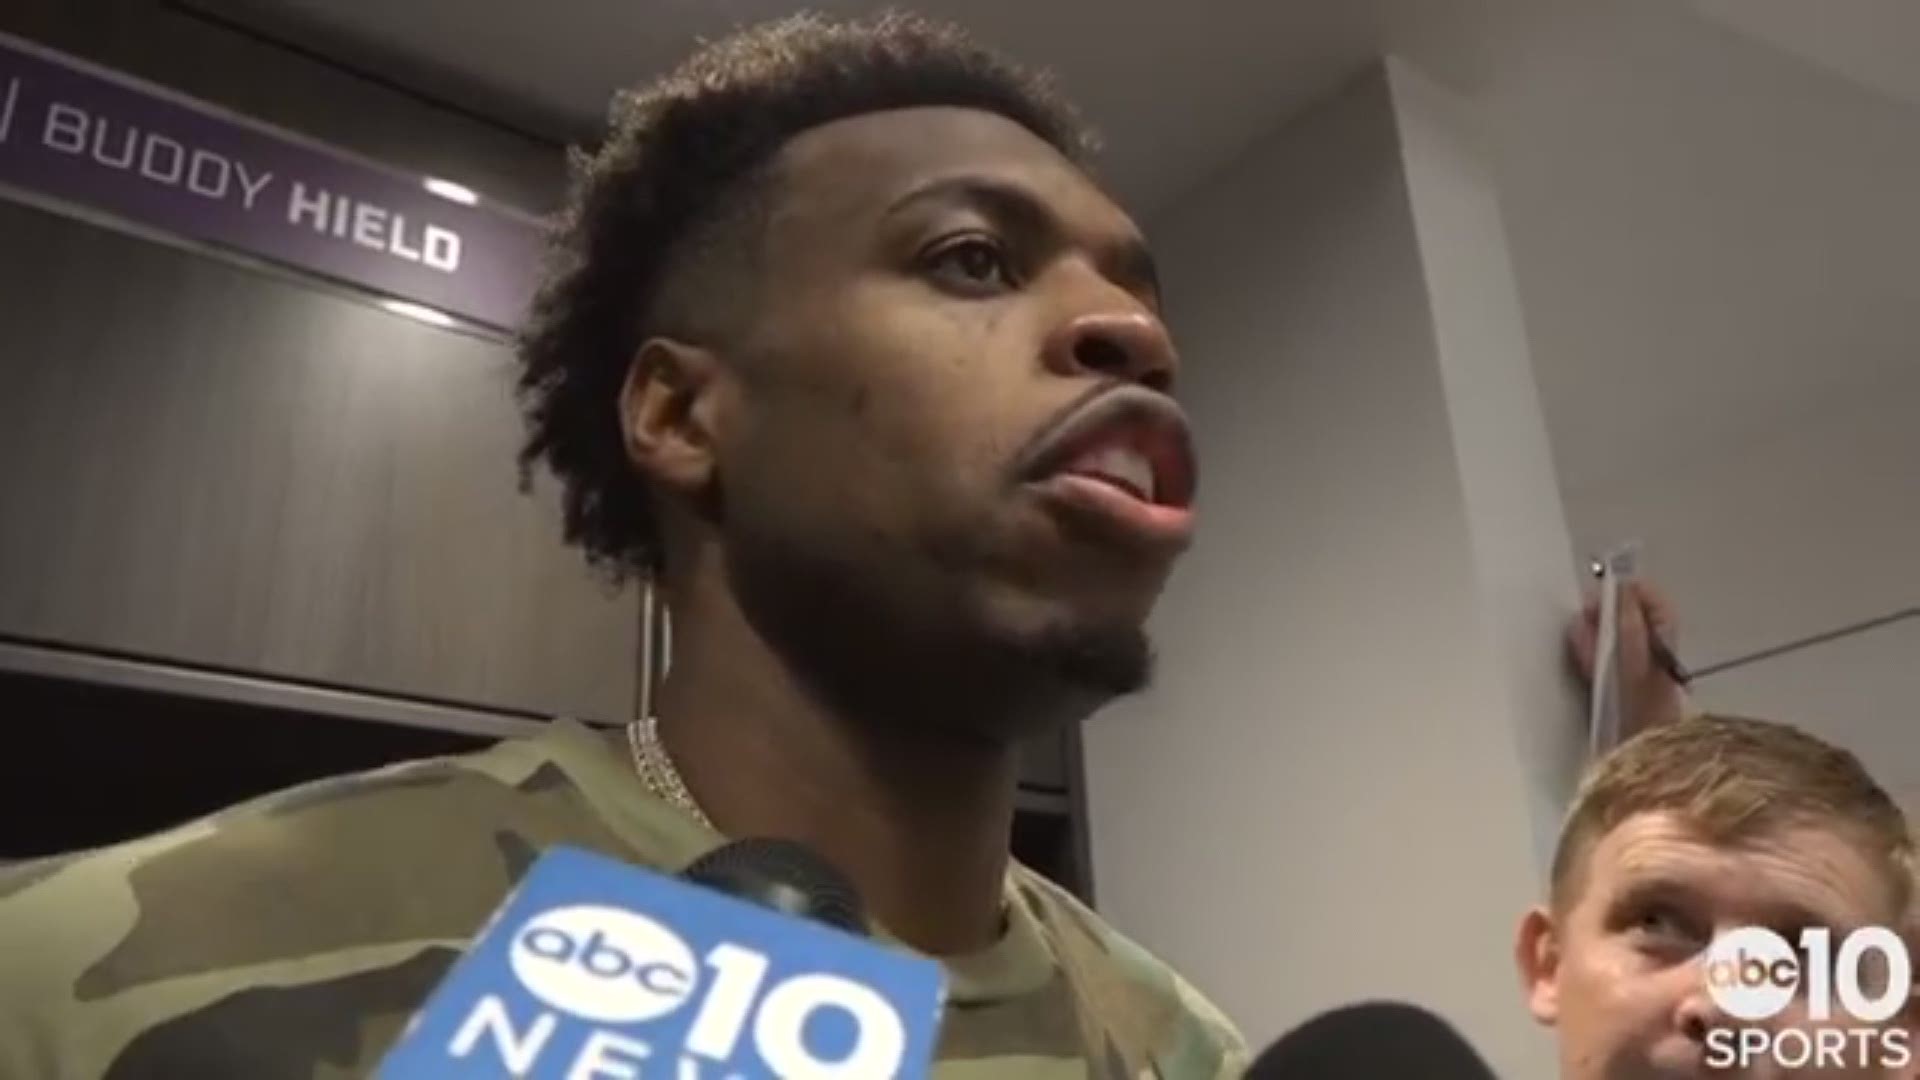 Kings guard Buddy Hield talks about setting a new franchise record for made three-pointers in a season, passing Peja Stojakovic's old mark of 240. He describes the season he's experienced, how much Peja, who is Sacramento's assistant general manager, has helped him grow, and what the ovation was like from the home fans.